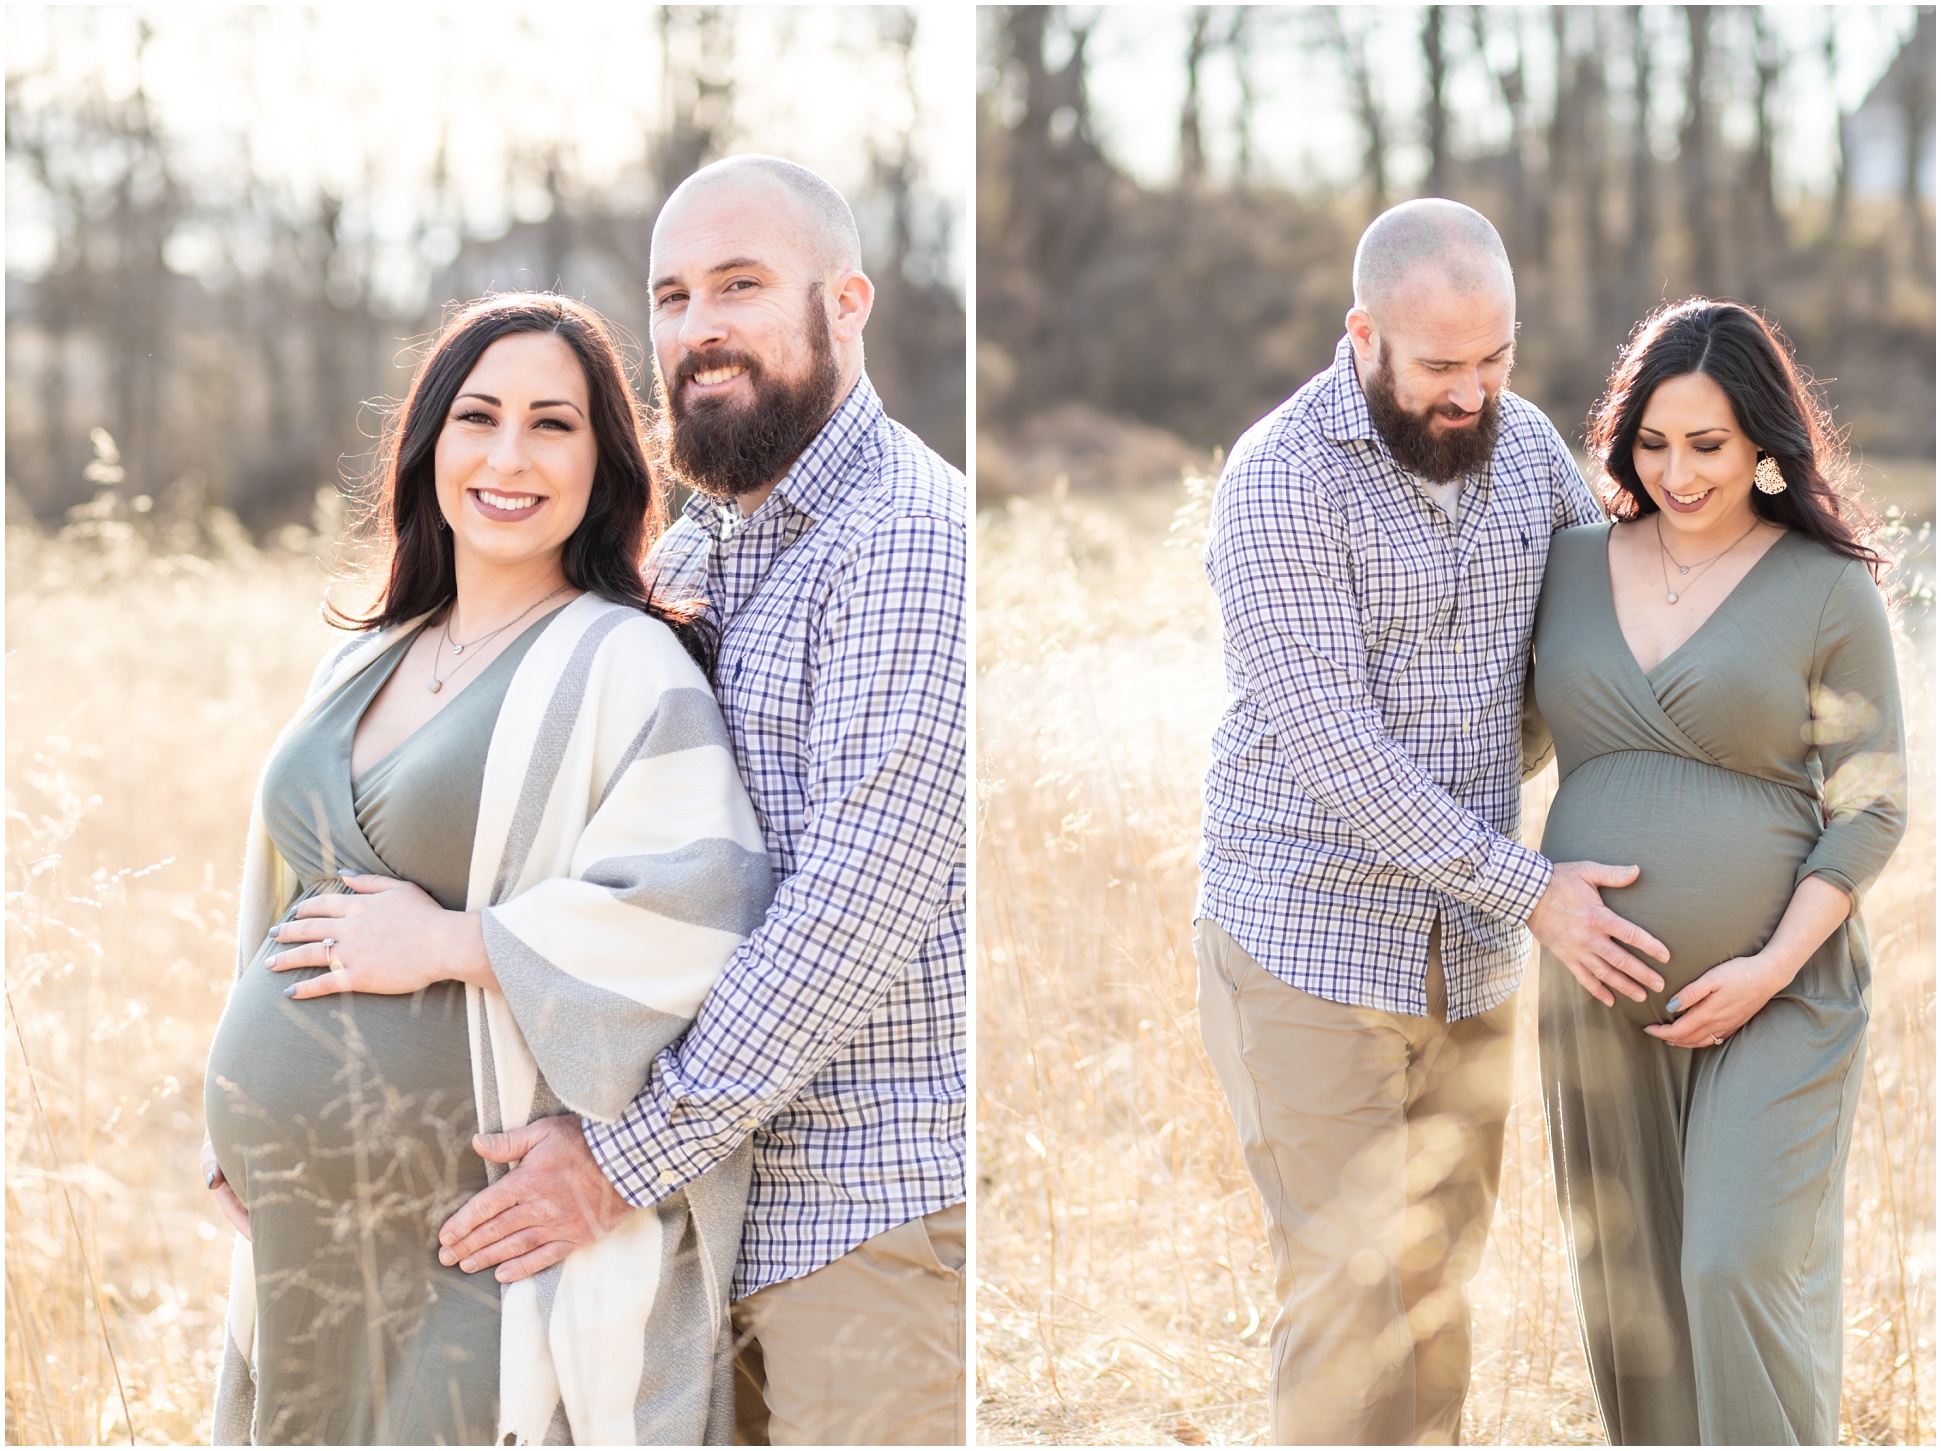 Maternity Photos in a field of golden wheat grass